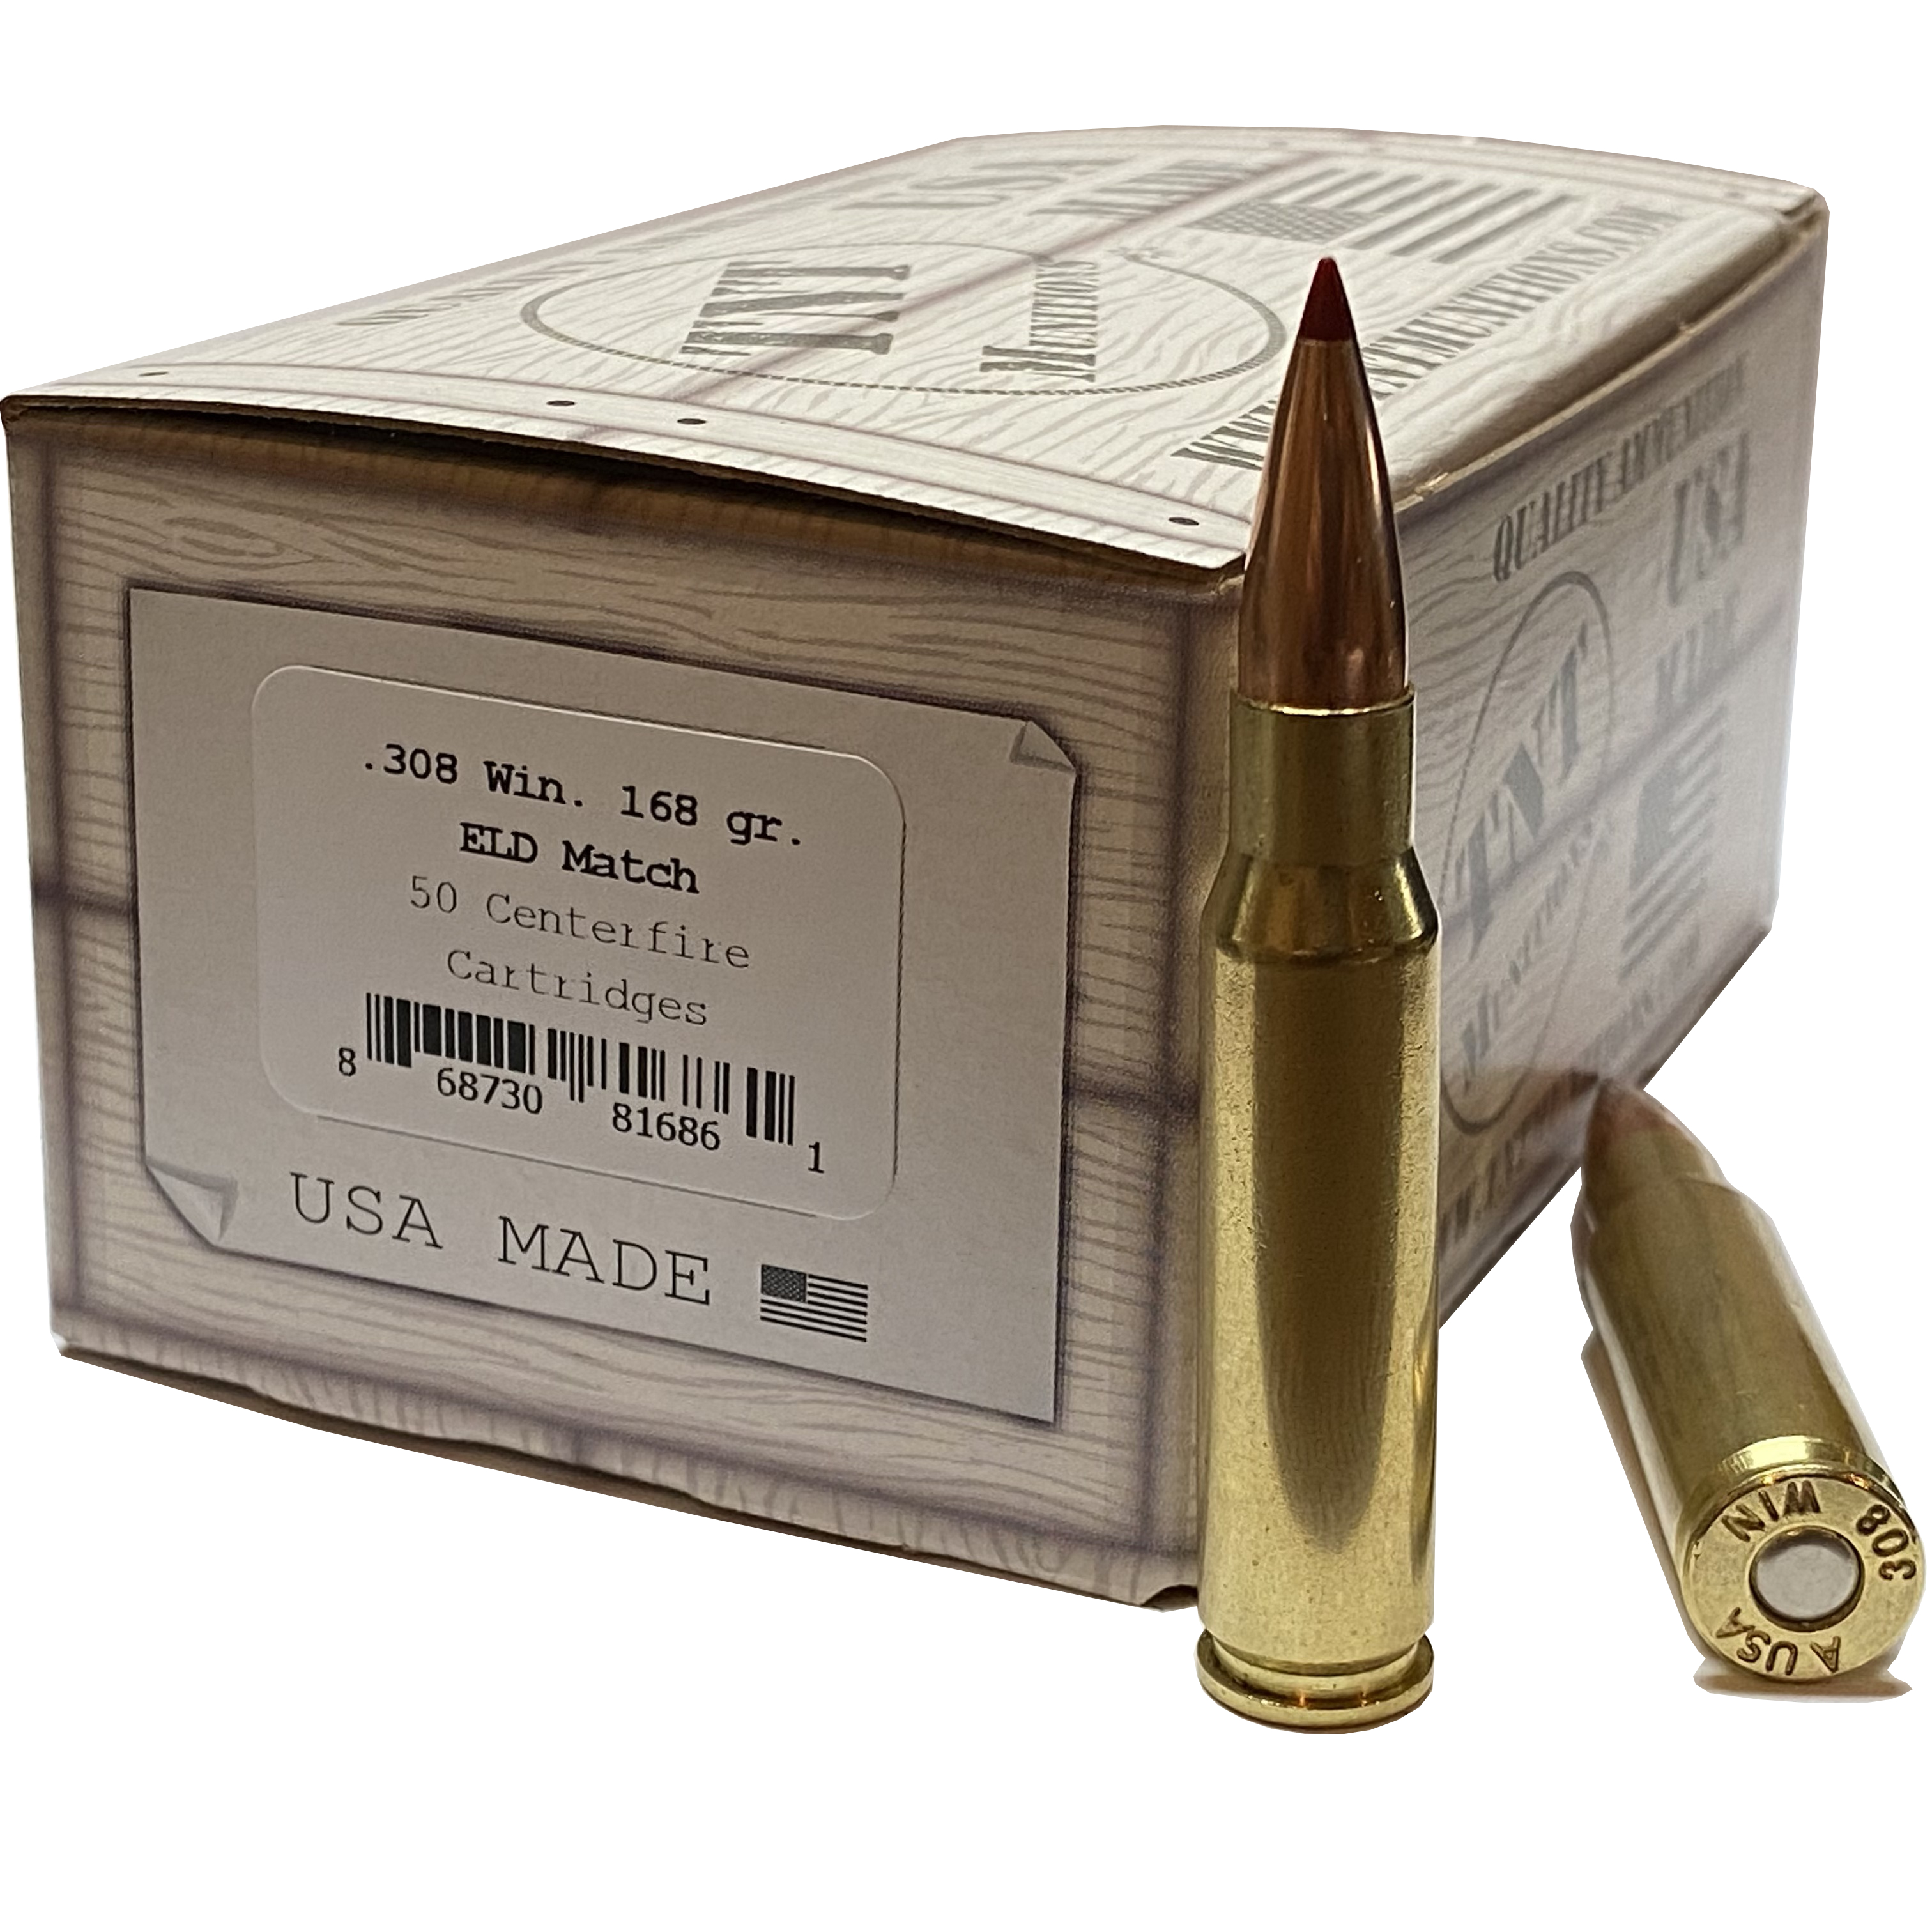 .308 Win. 168 gr. ELD Match. MEMORIAL DAY SALE! THROUGH MAY 29TH ONLY - SHIPS NBD